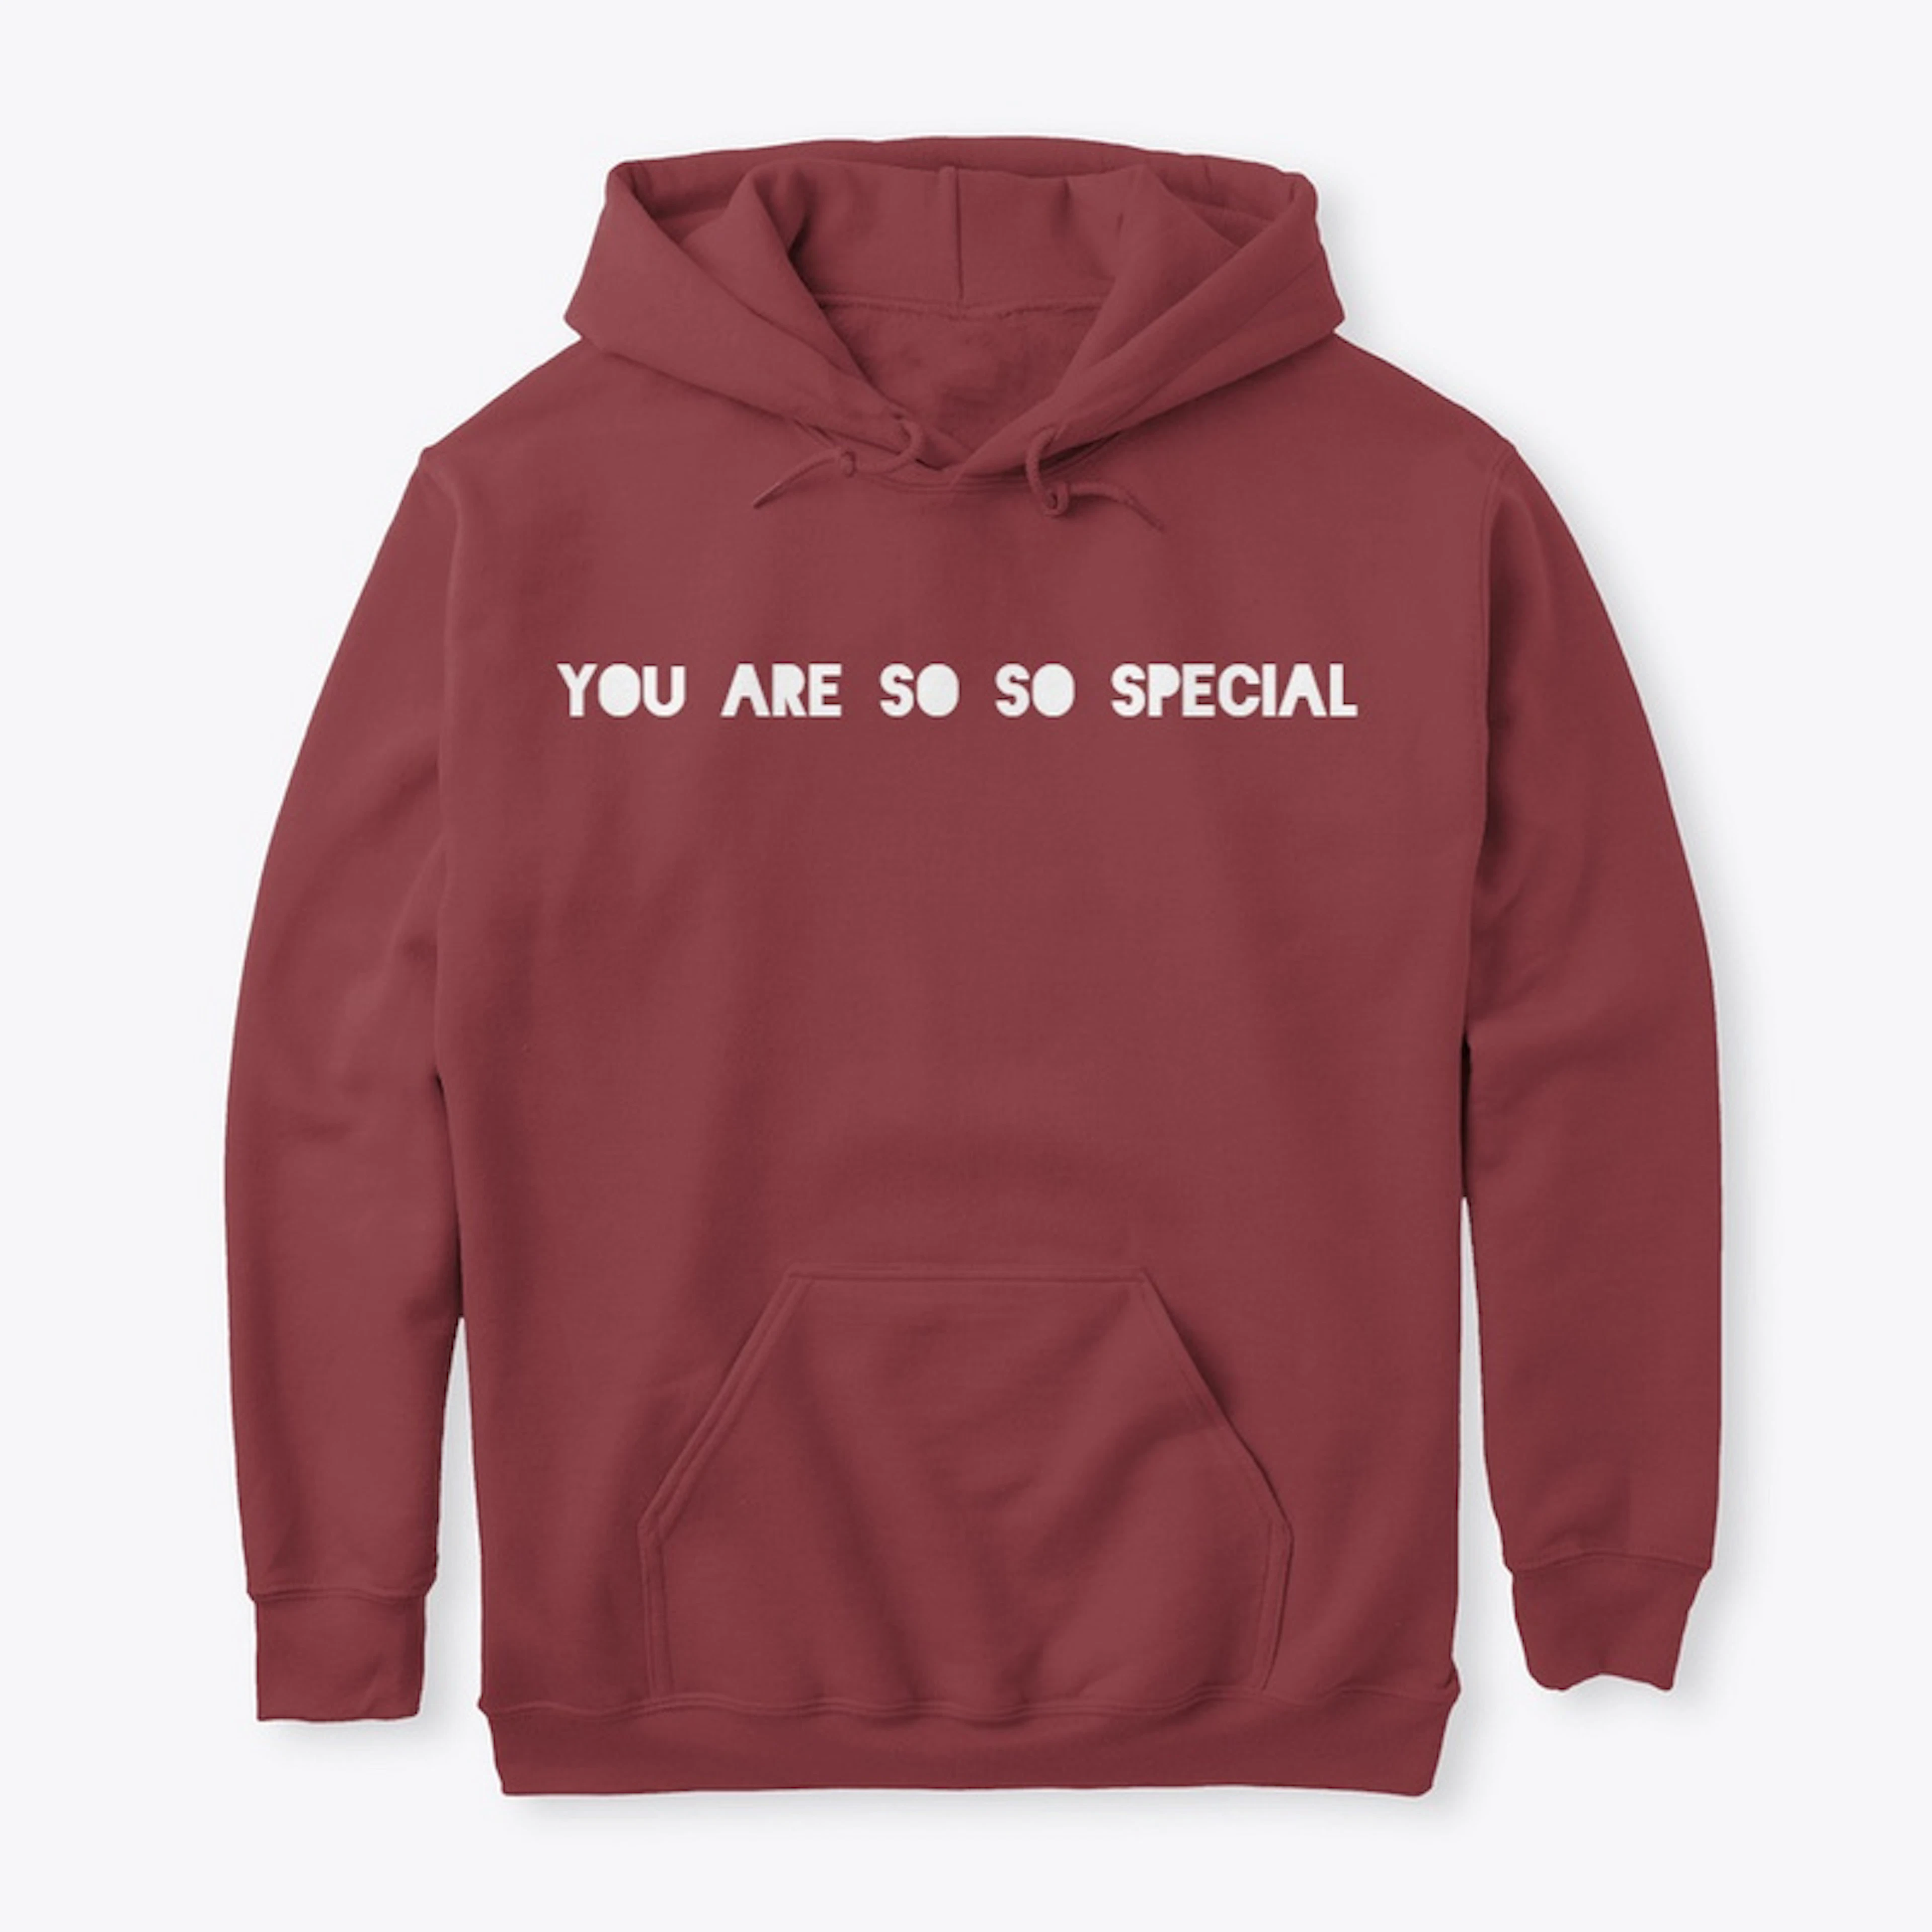 you are so so special